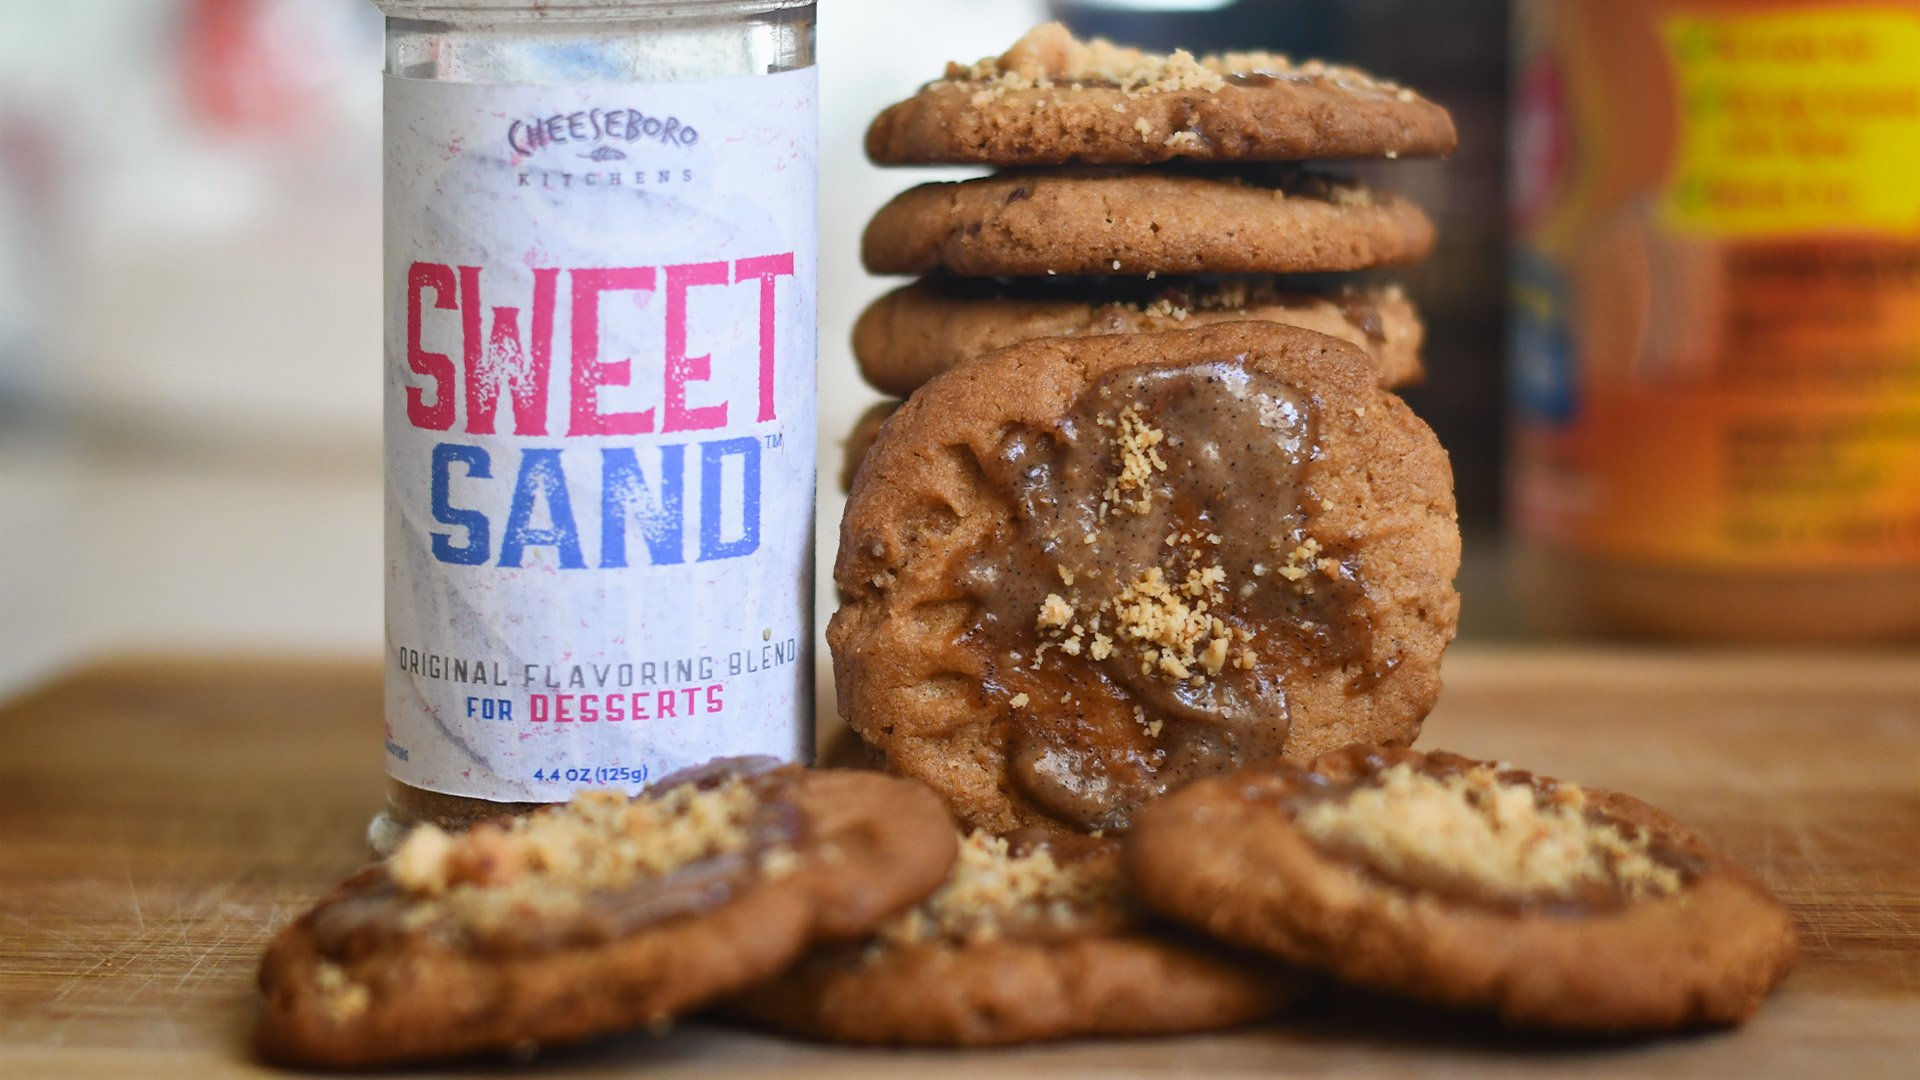 cheeskitch-240124-sand-sweet-spiced-iced-peanut-butter-cookies-stacked-jar-1-1920-hor-meta.jpg